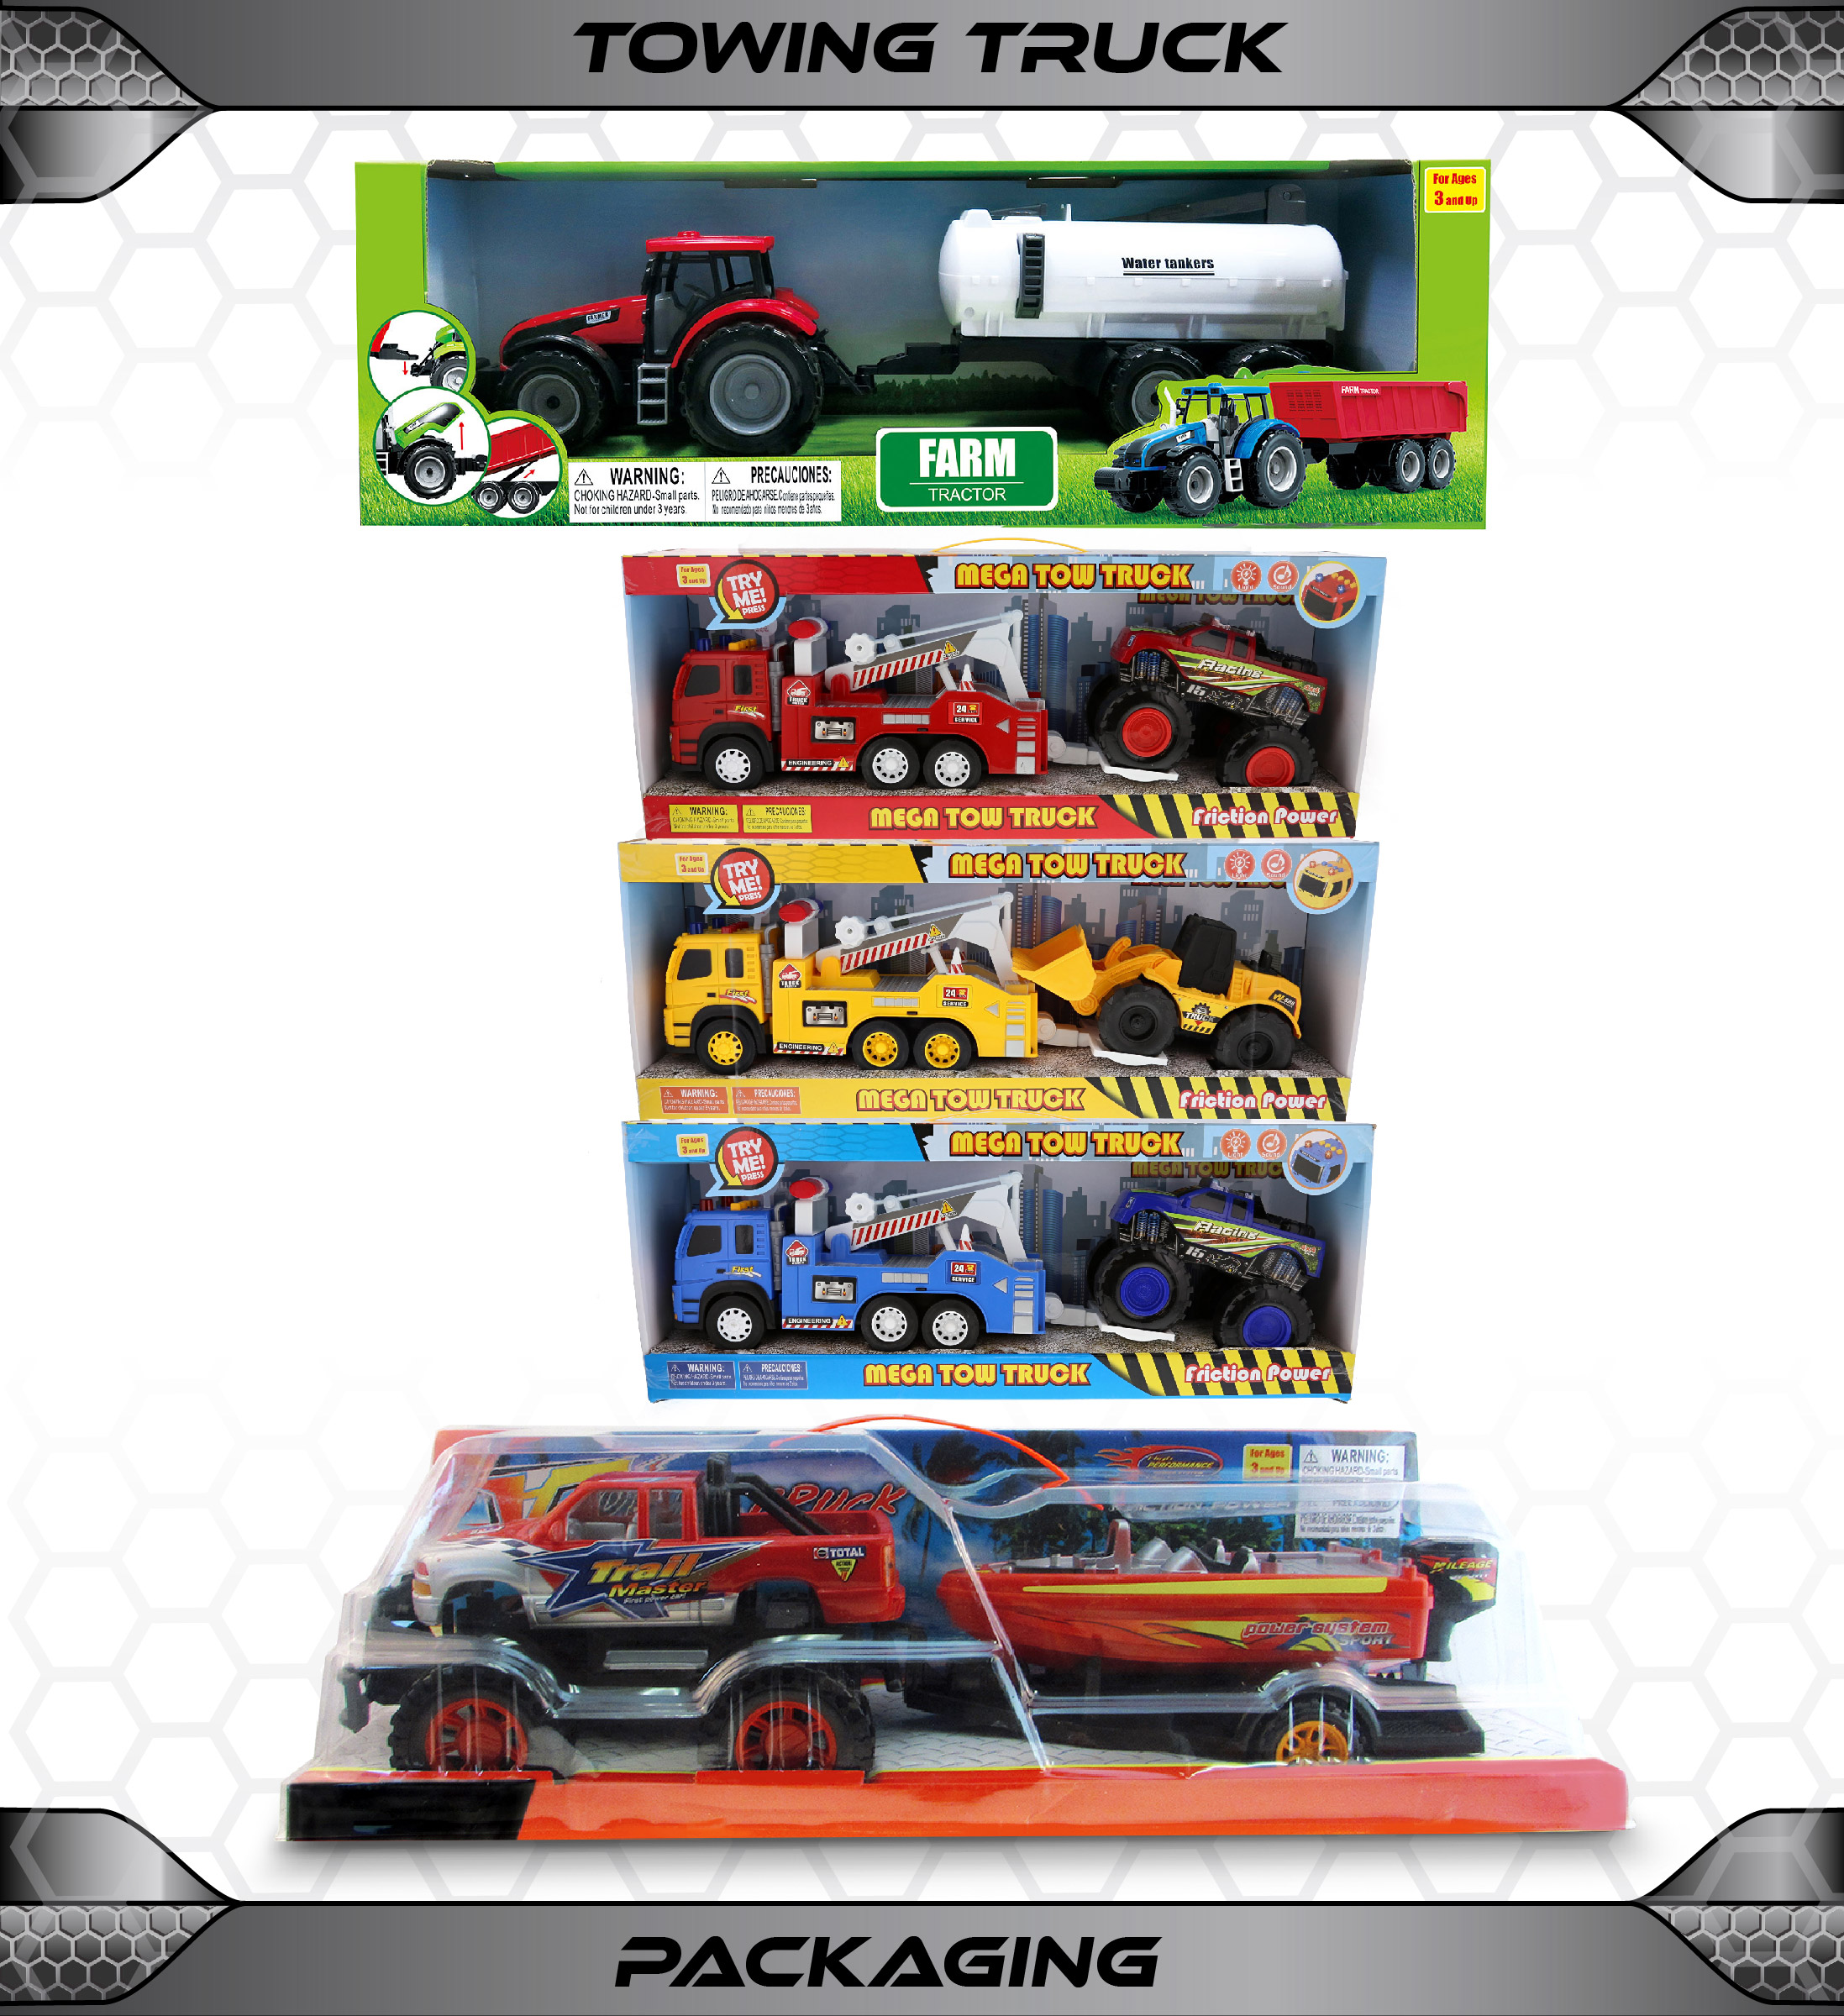 Mozlly Friction Powered Truck Toy Set – Includes 1 Monster Pick Up with Speed Boat, 3 Emergency Tow Trucks with Racing Trucks and 3 Farm Vehicles with Water Tank, Log Hauler, Tractor – Styles Vary - image 5 of 7